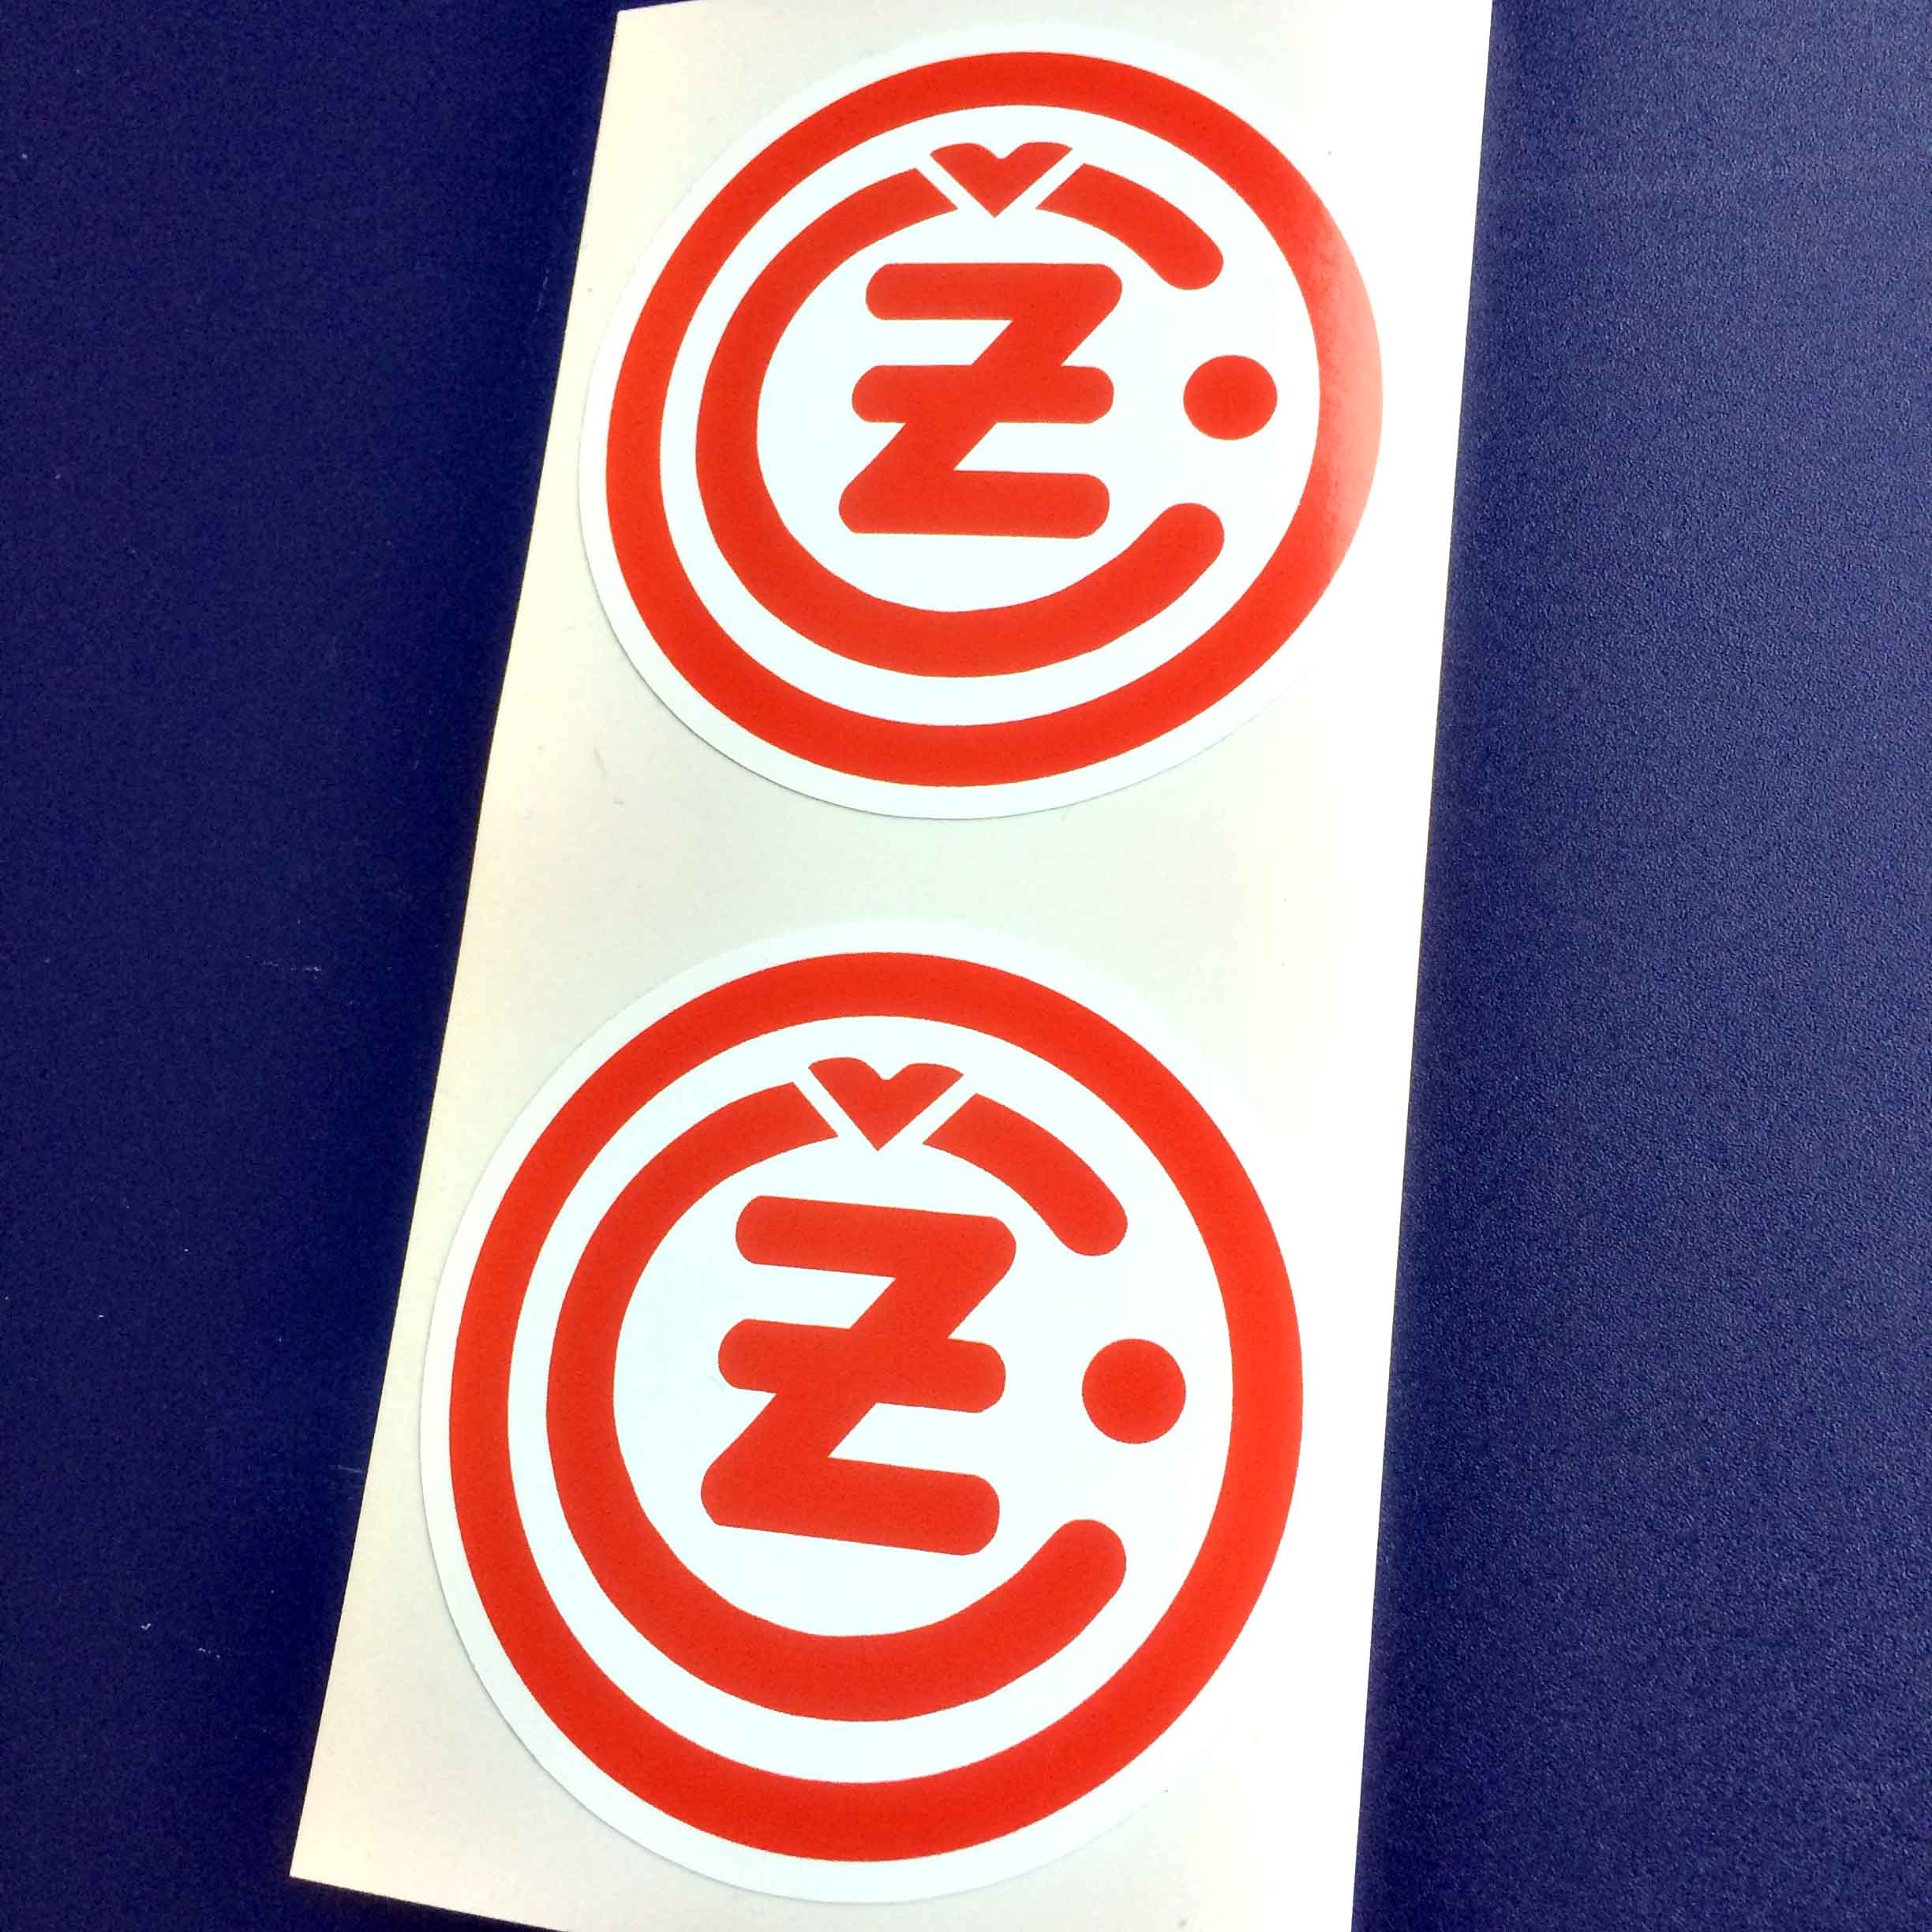 CZ MOTORCYCLE STICKERS. Two concentric circles in red. The area around them is white. The inner circle is shaped in a C with a Z in the centre. Above the Z is a v shape. To the right of the Z is a dot also in red.